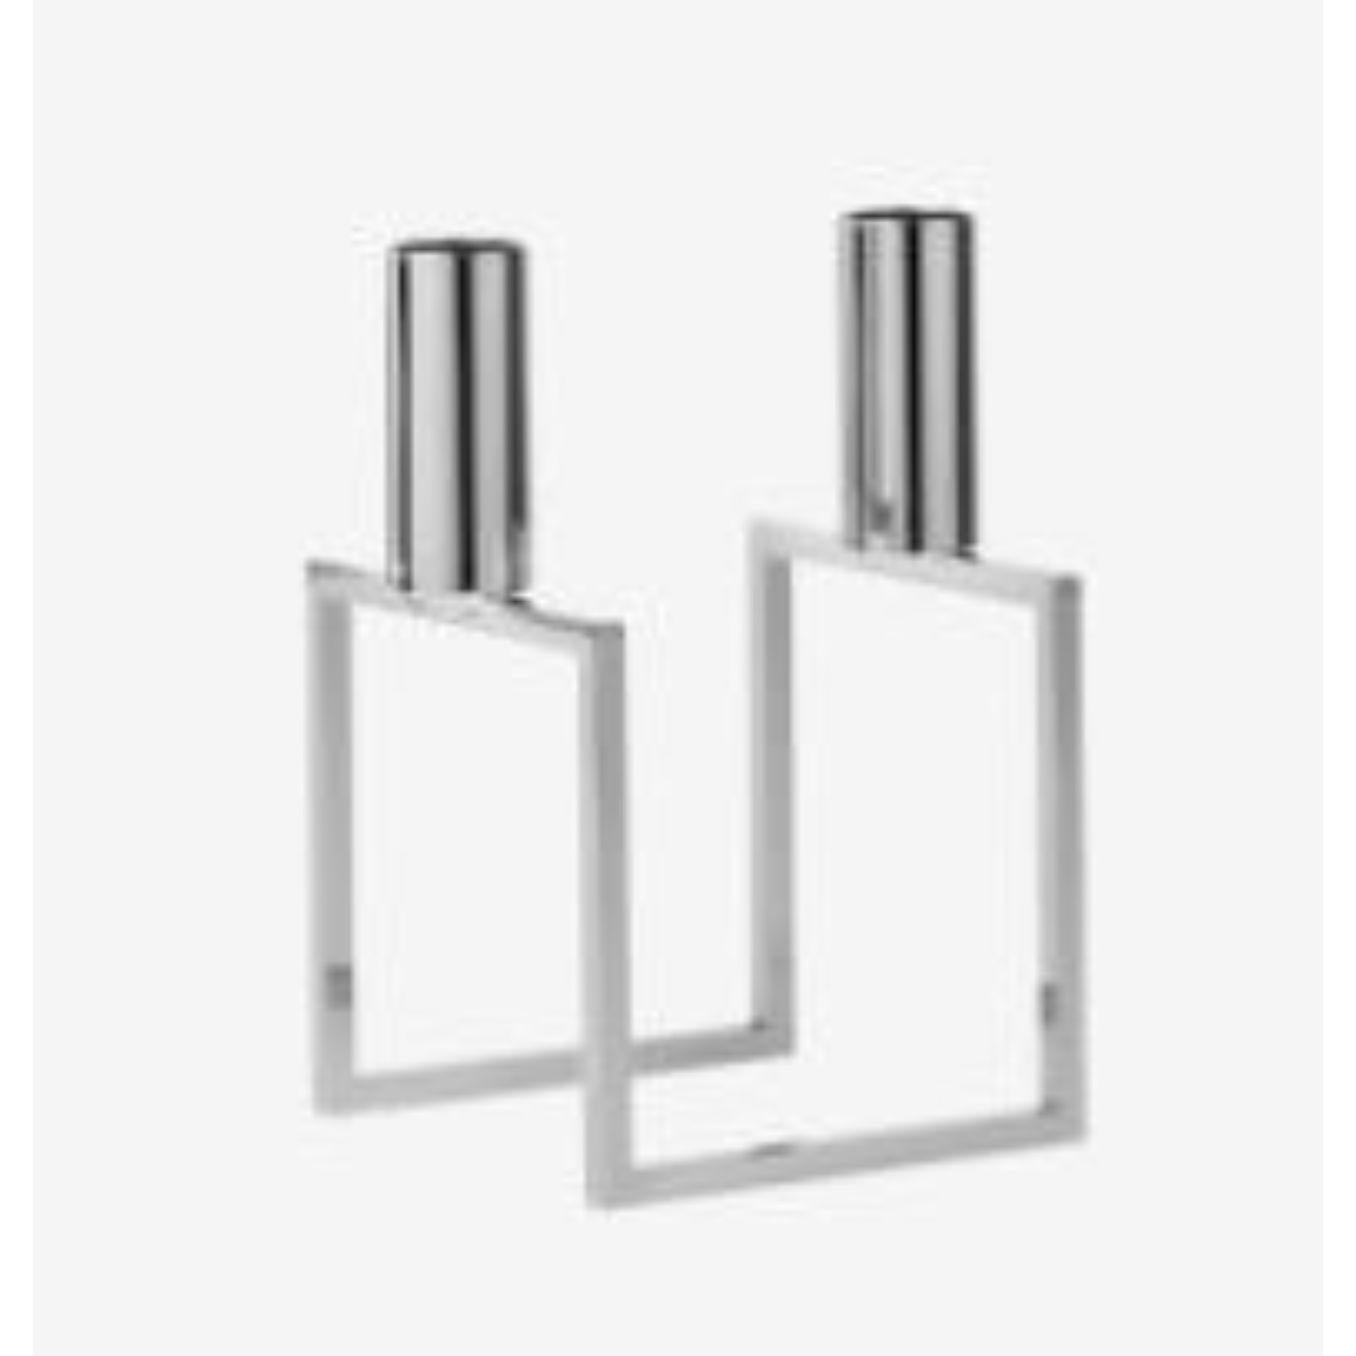 Nickel plated Line candle holder by Lassen
Dimensions: d 10 x w 10 x h 16 cm 
Materials: Metal 
Also available in different dimensions. 
Weight: 0.60 Kg

With a sharp sense of contemporary Functionalist style, Mogens Lassen designed the iconic